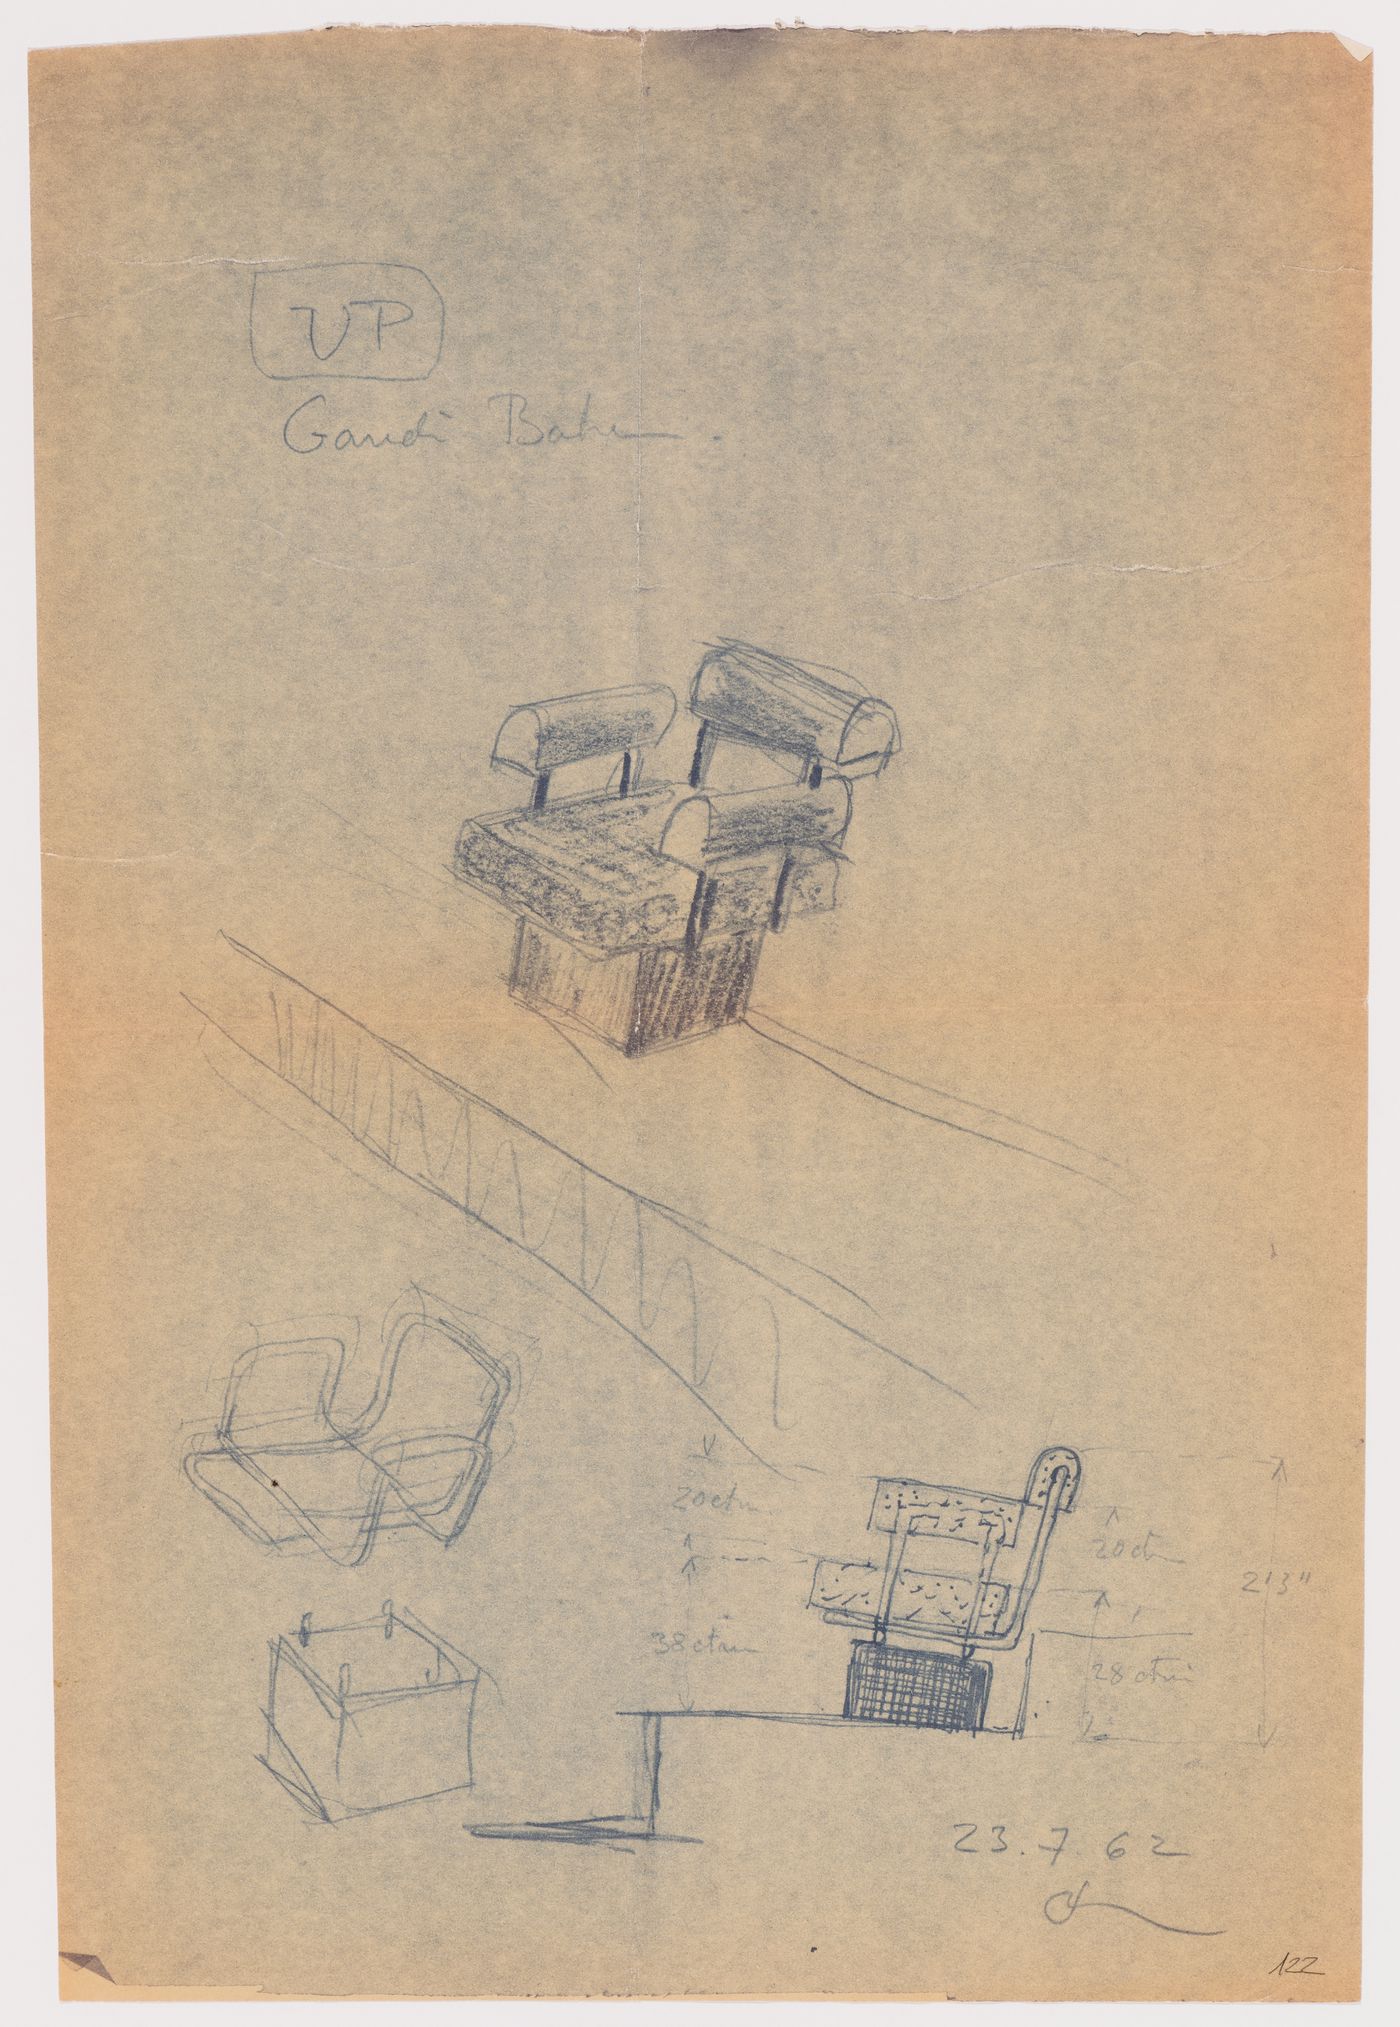 Sketch of a seat for the auditorium of the Gandhi Bhawan, Panjab University in sector 14 in Chandigarh, India